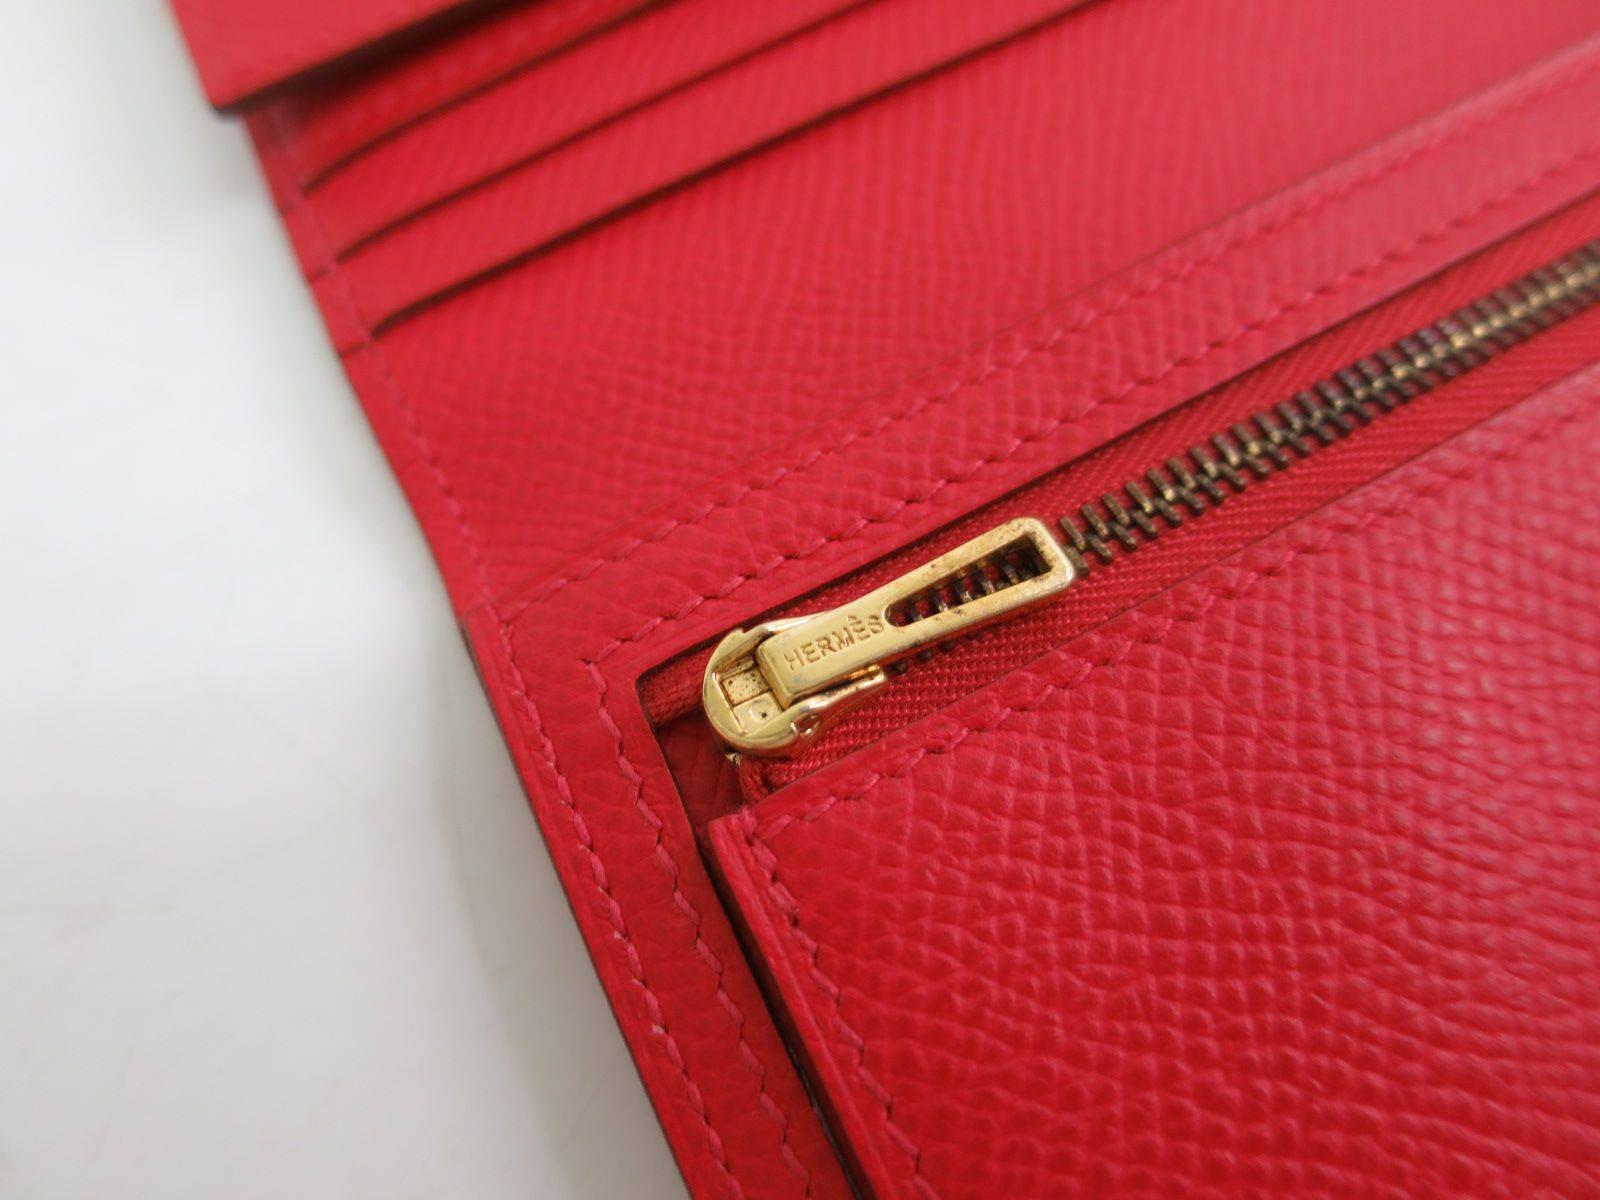 Hermes Red Leather Epsom Leather Gold 'H' Bearn Wallet in Box 2